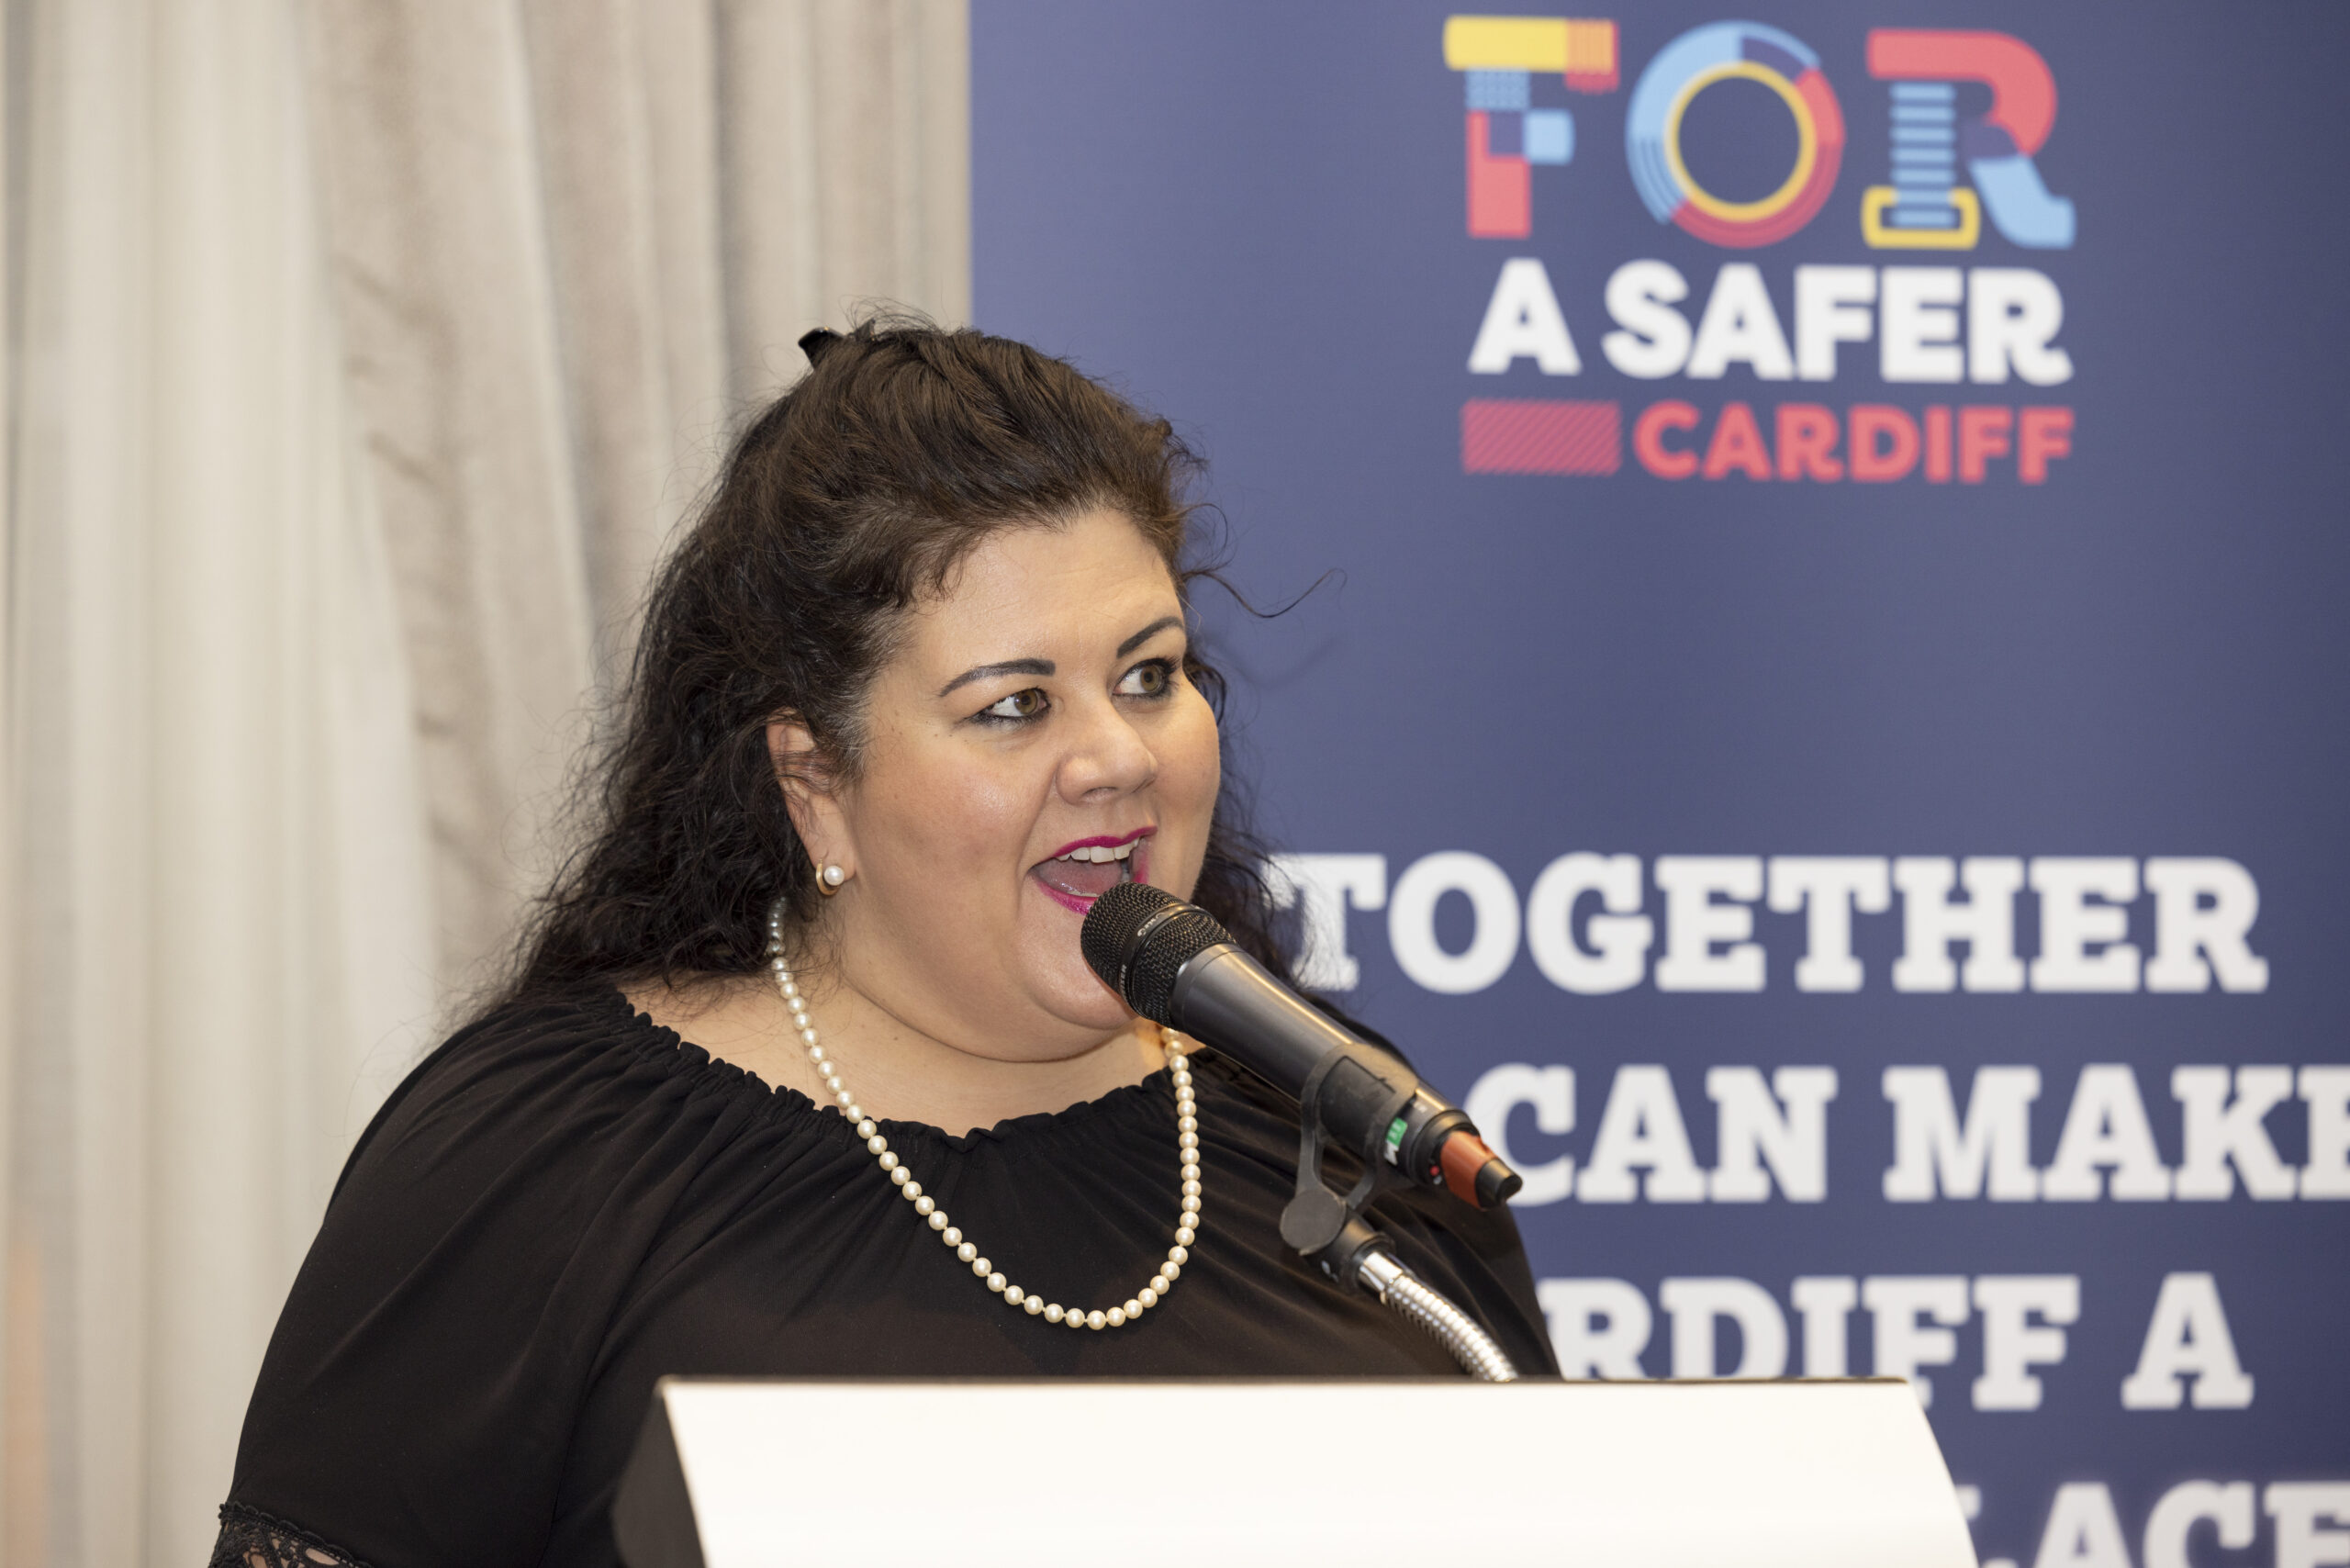 Amy Lame Night Czar for London speaking at the launch of the Cardiff Women's Safety Network